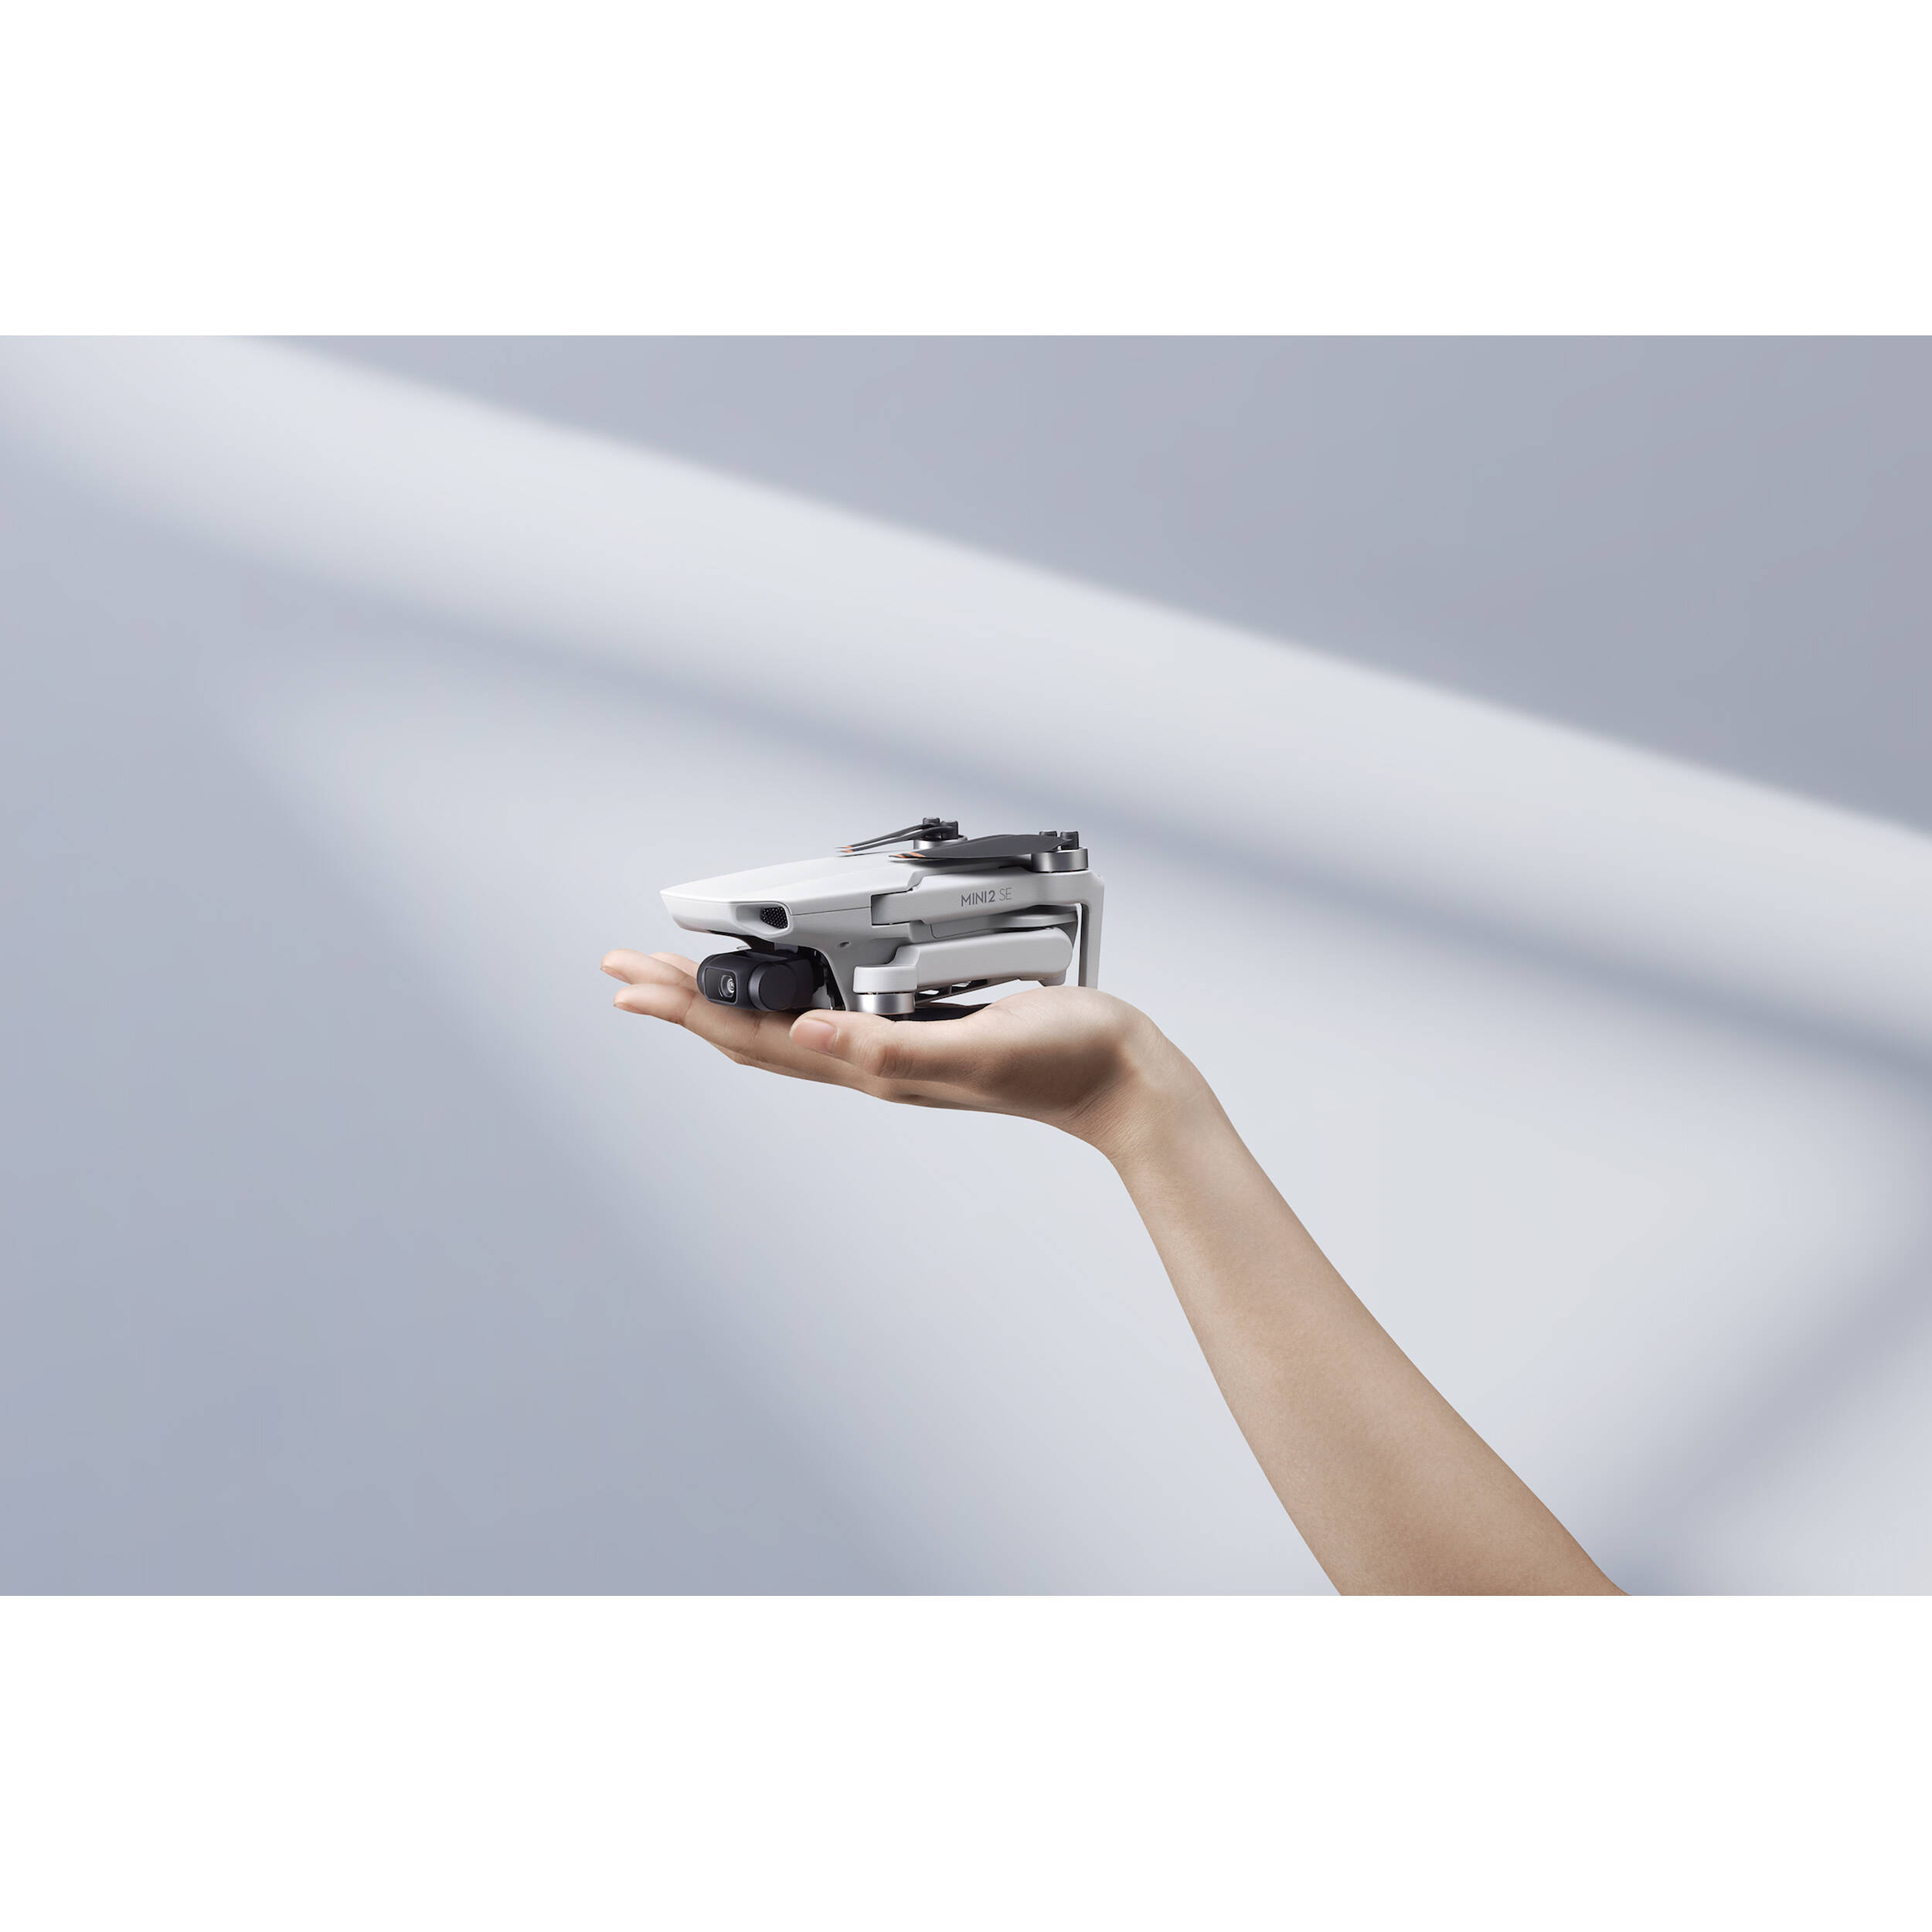 Rent DJI Mini 3 Pro with RC-N1 Controller from €29.90 per month